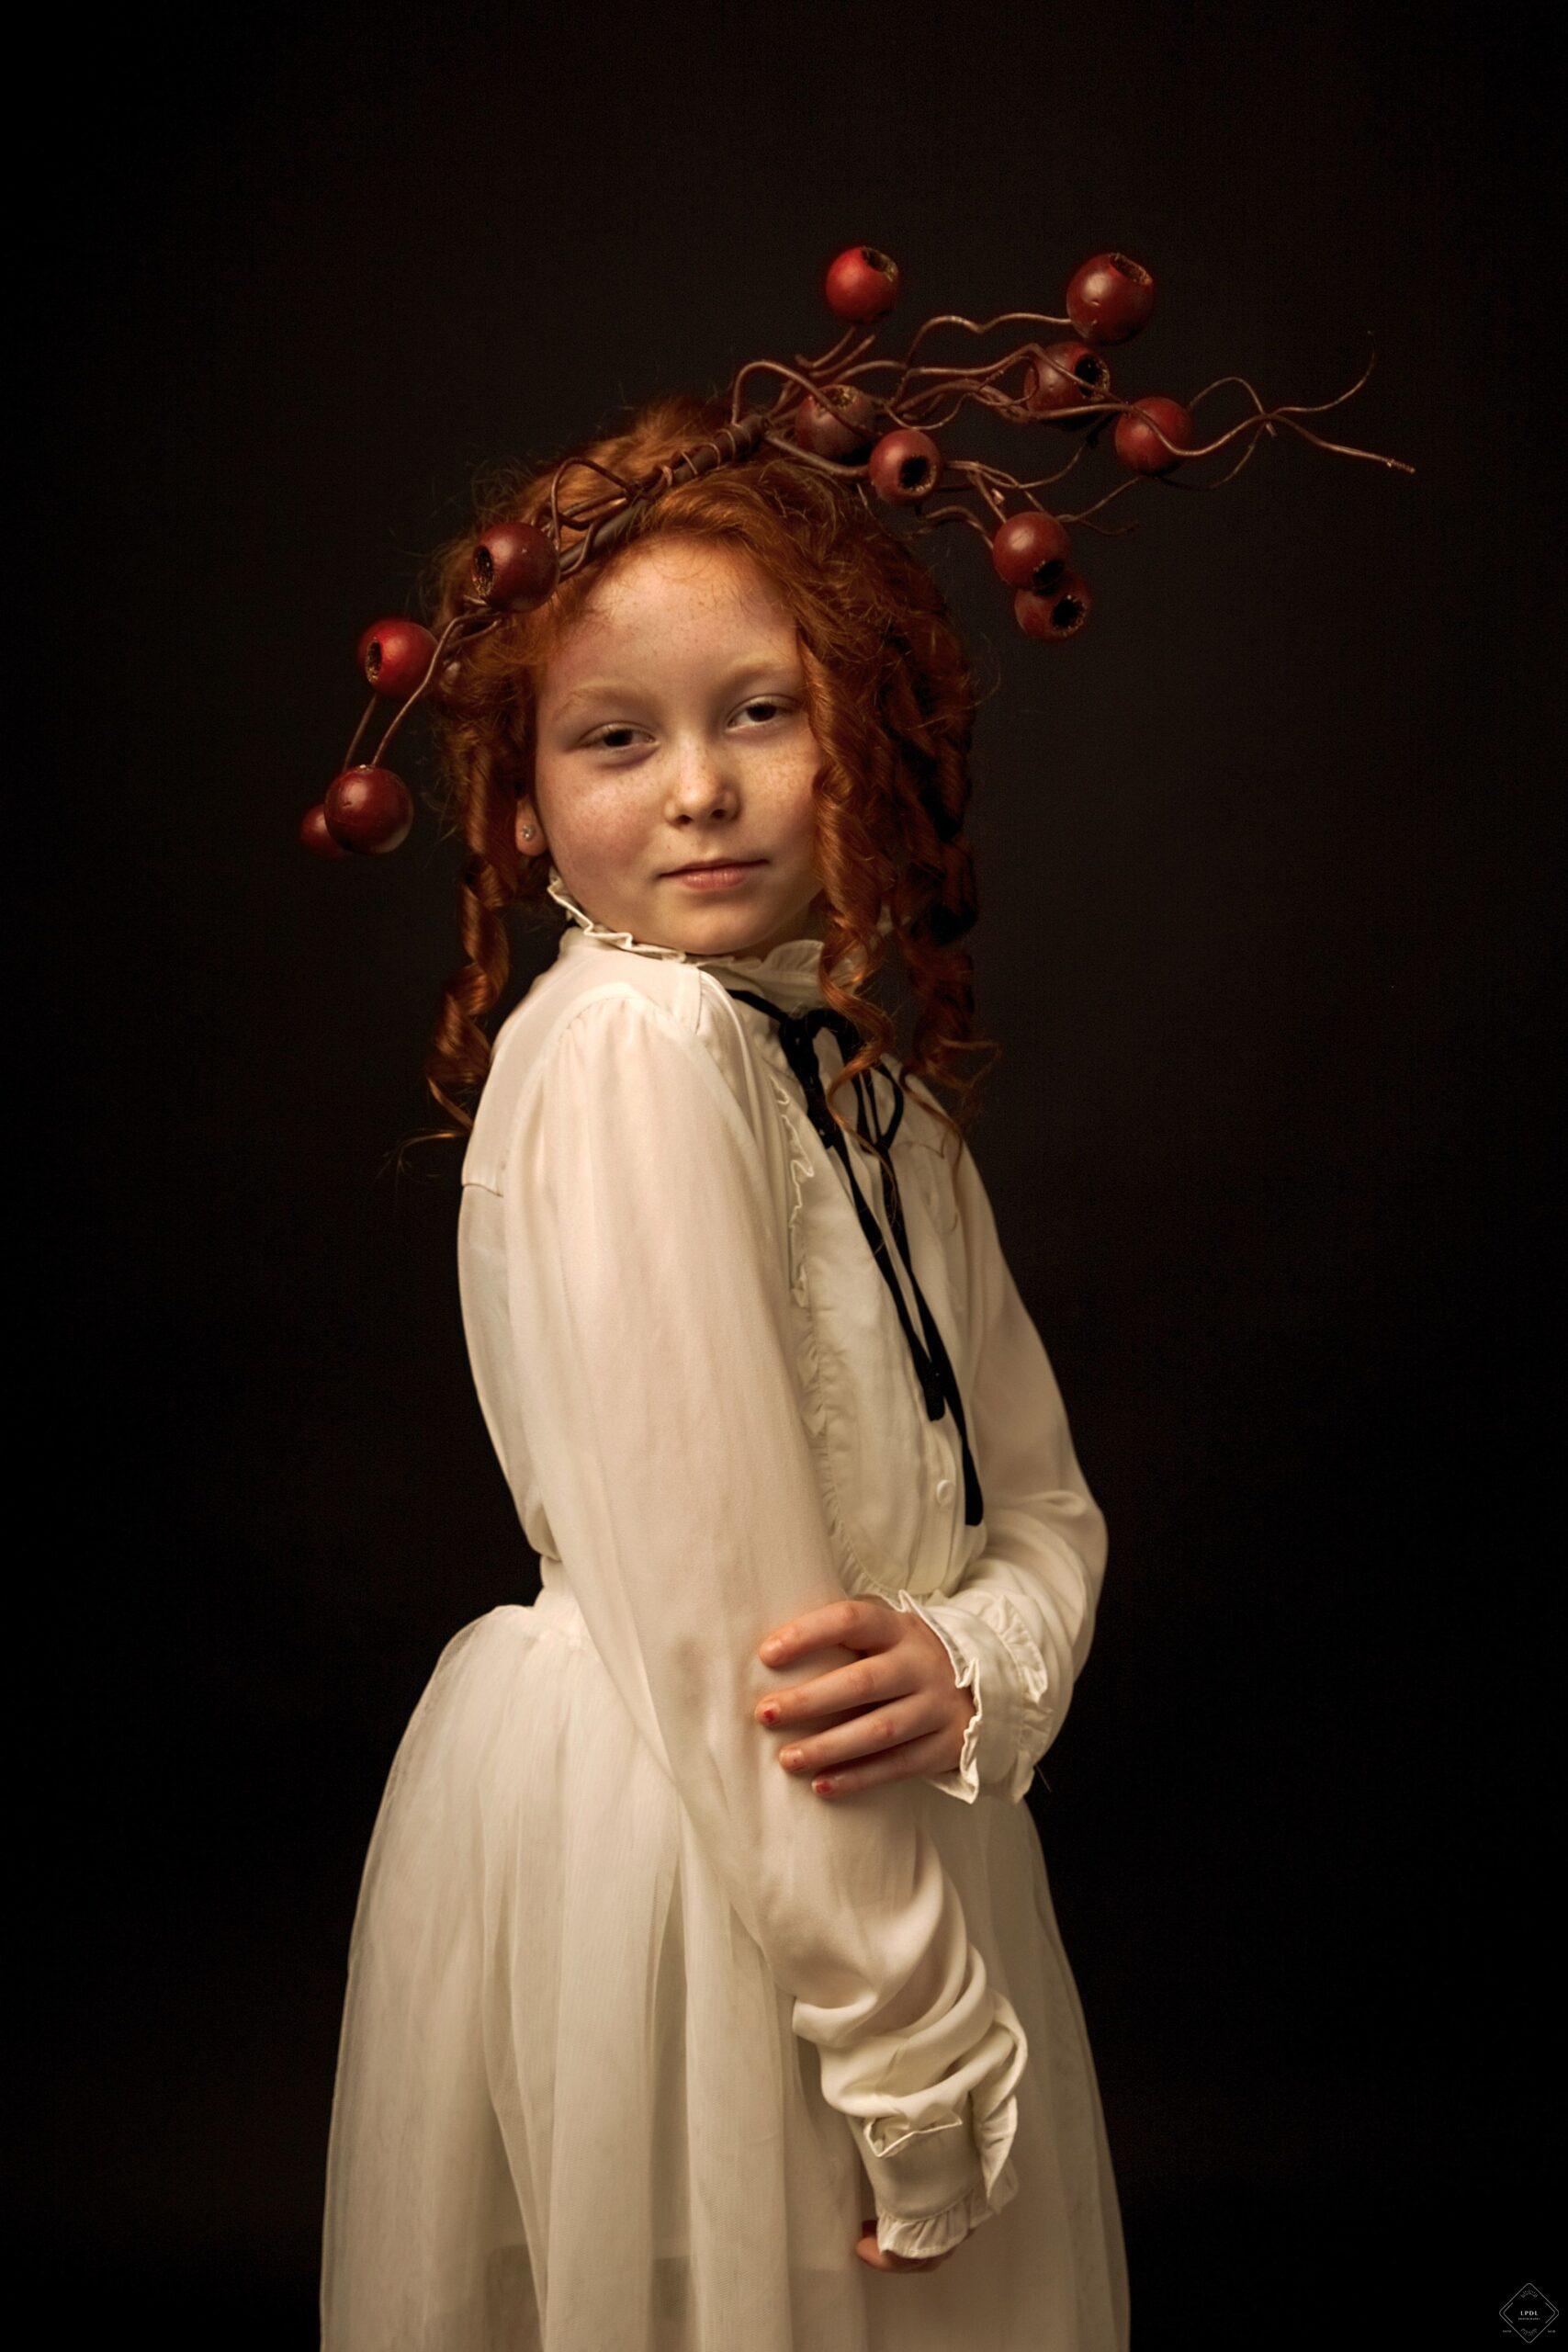 Young girl with red hair and headpiece posing for a vintage portrait